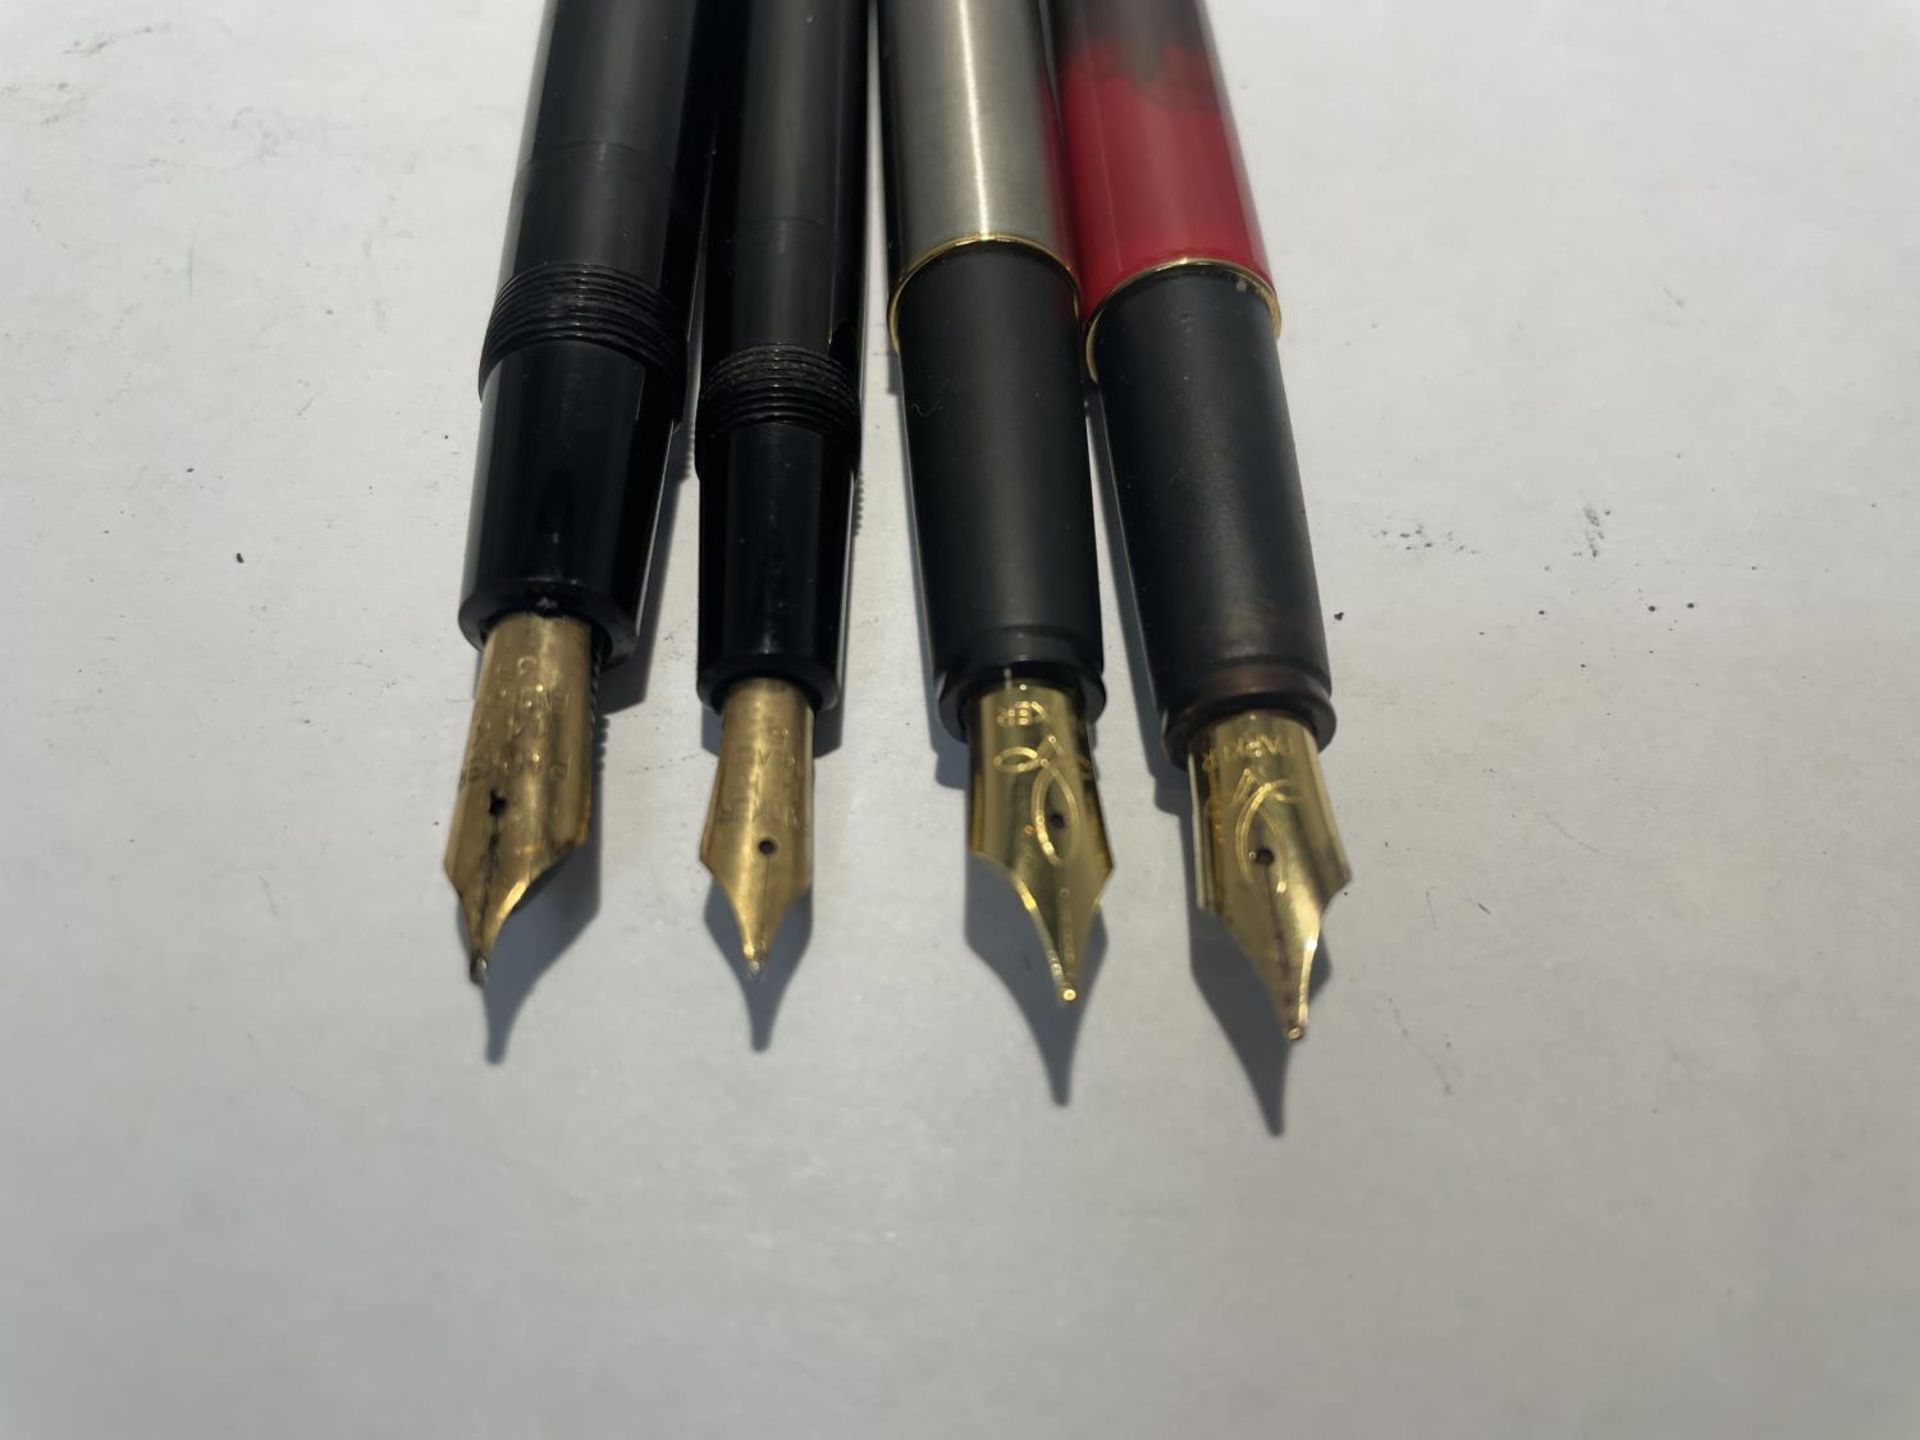 FOUR VINTAGE PARKER FOUNTAIN PENS - TWO WITH 14 CARAT GOLD NIBS - Image 3 of 3